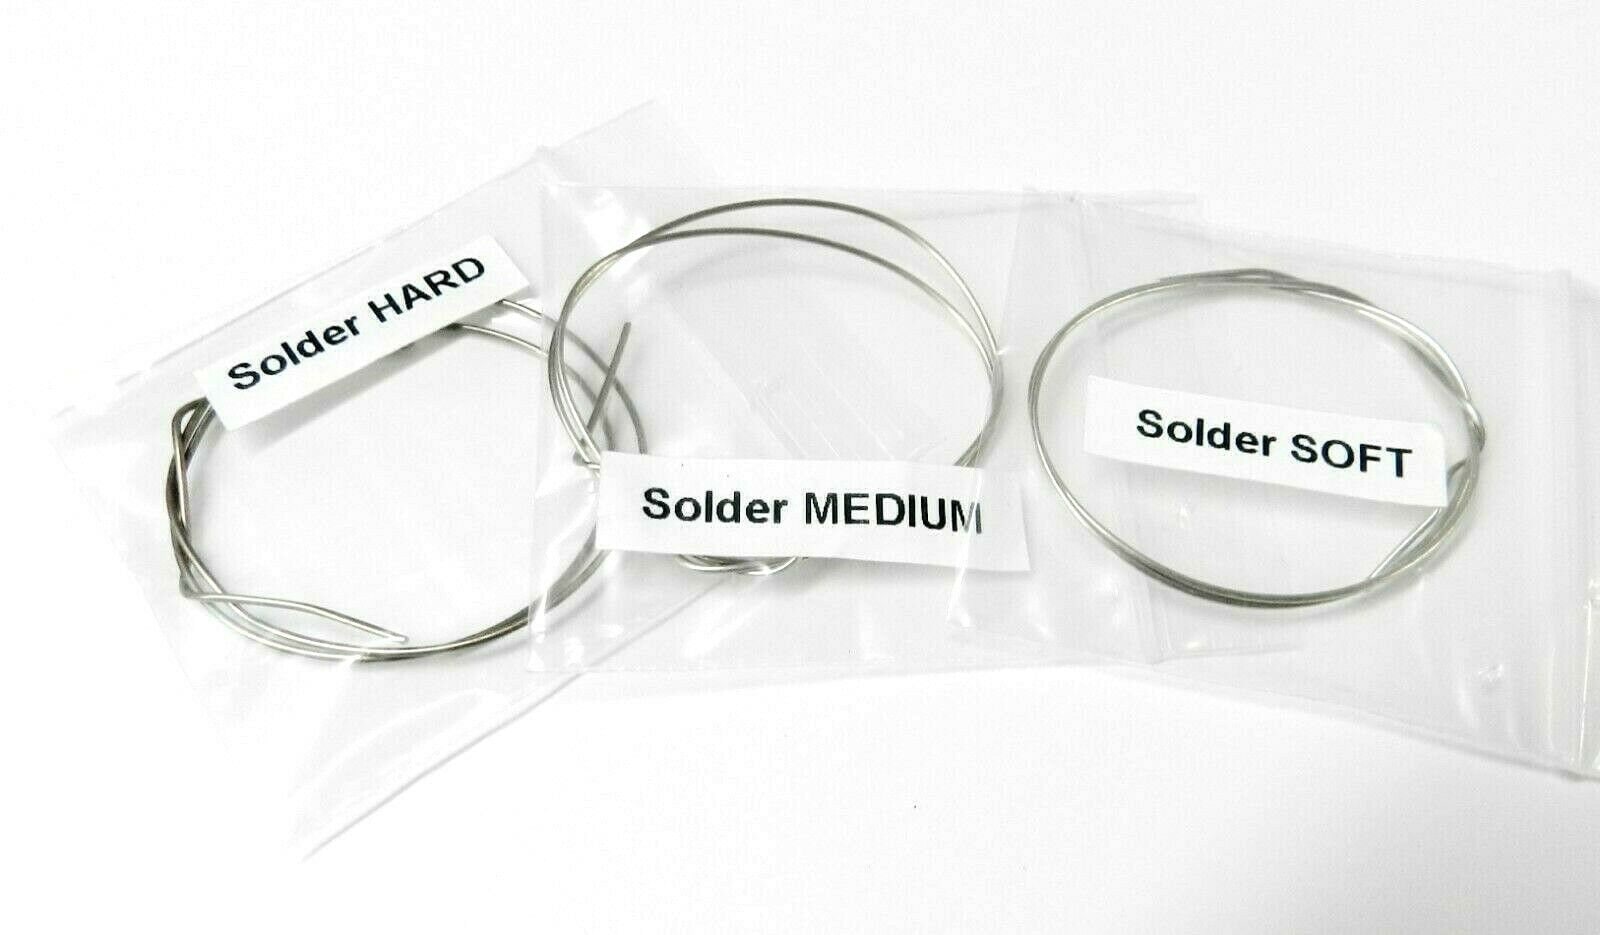 JTS Jewelry Silver Solder Wire Assorted 4 Types Easy Soft, Soft, Medium Hard Soldering Made in USA